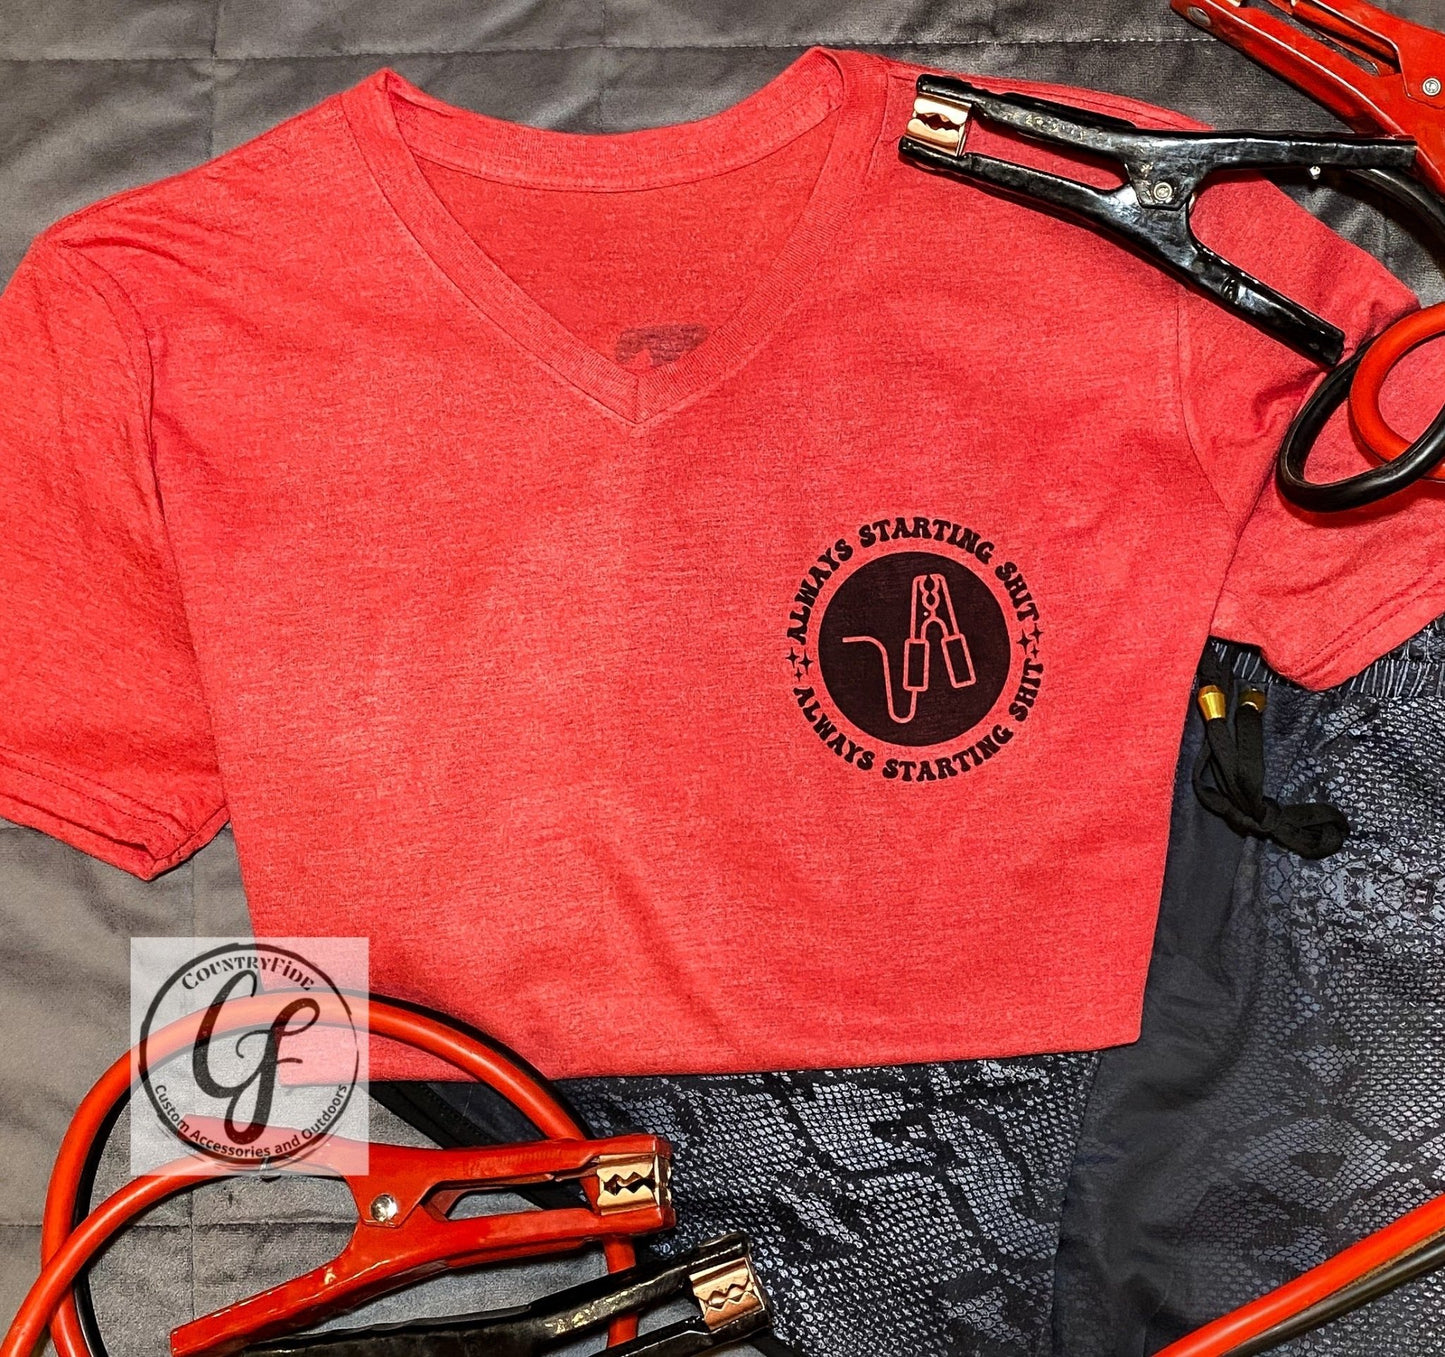 JUMPER CABLES - CountryFide Custom Accessories and Outdoors